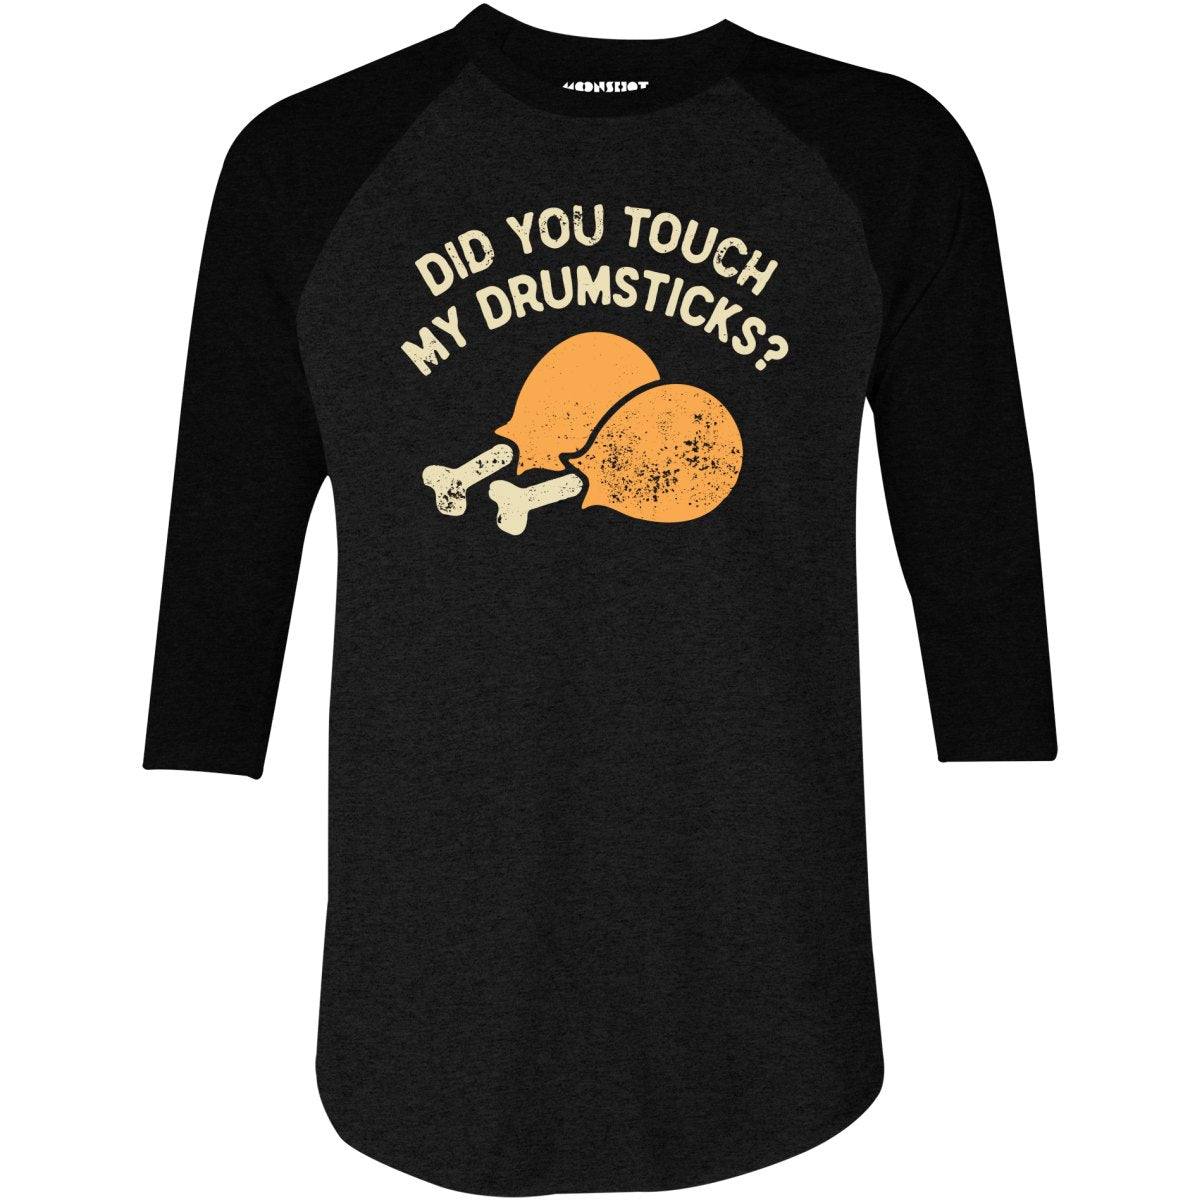 Did You Touch My Drumsticks? - 3/4 Sleeve Raglan T-Shirt